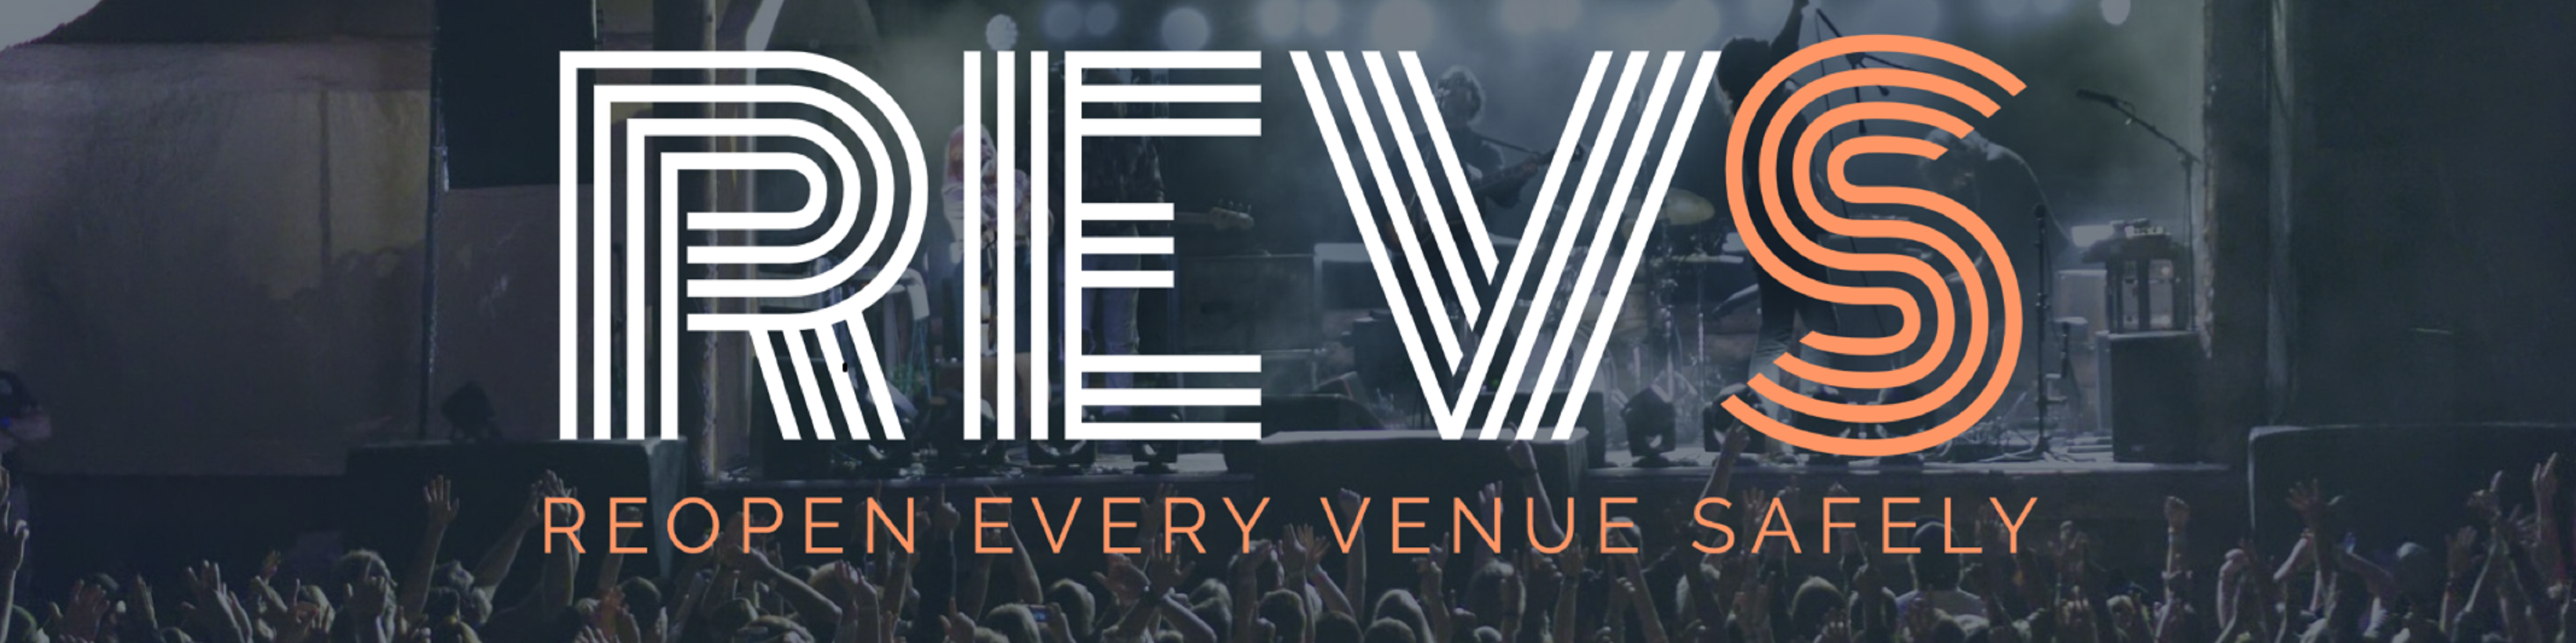 REVS Initiative Launches to Support Timely and Safe Music Venue Reopening